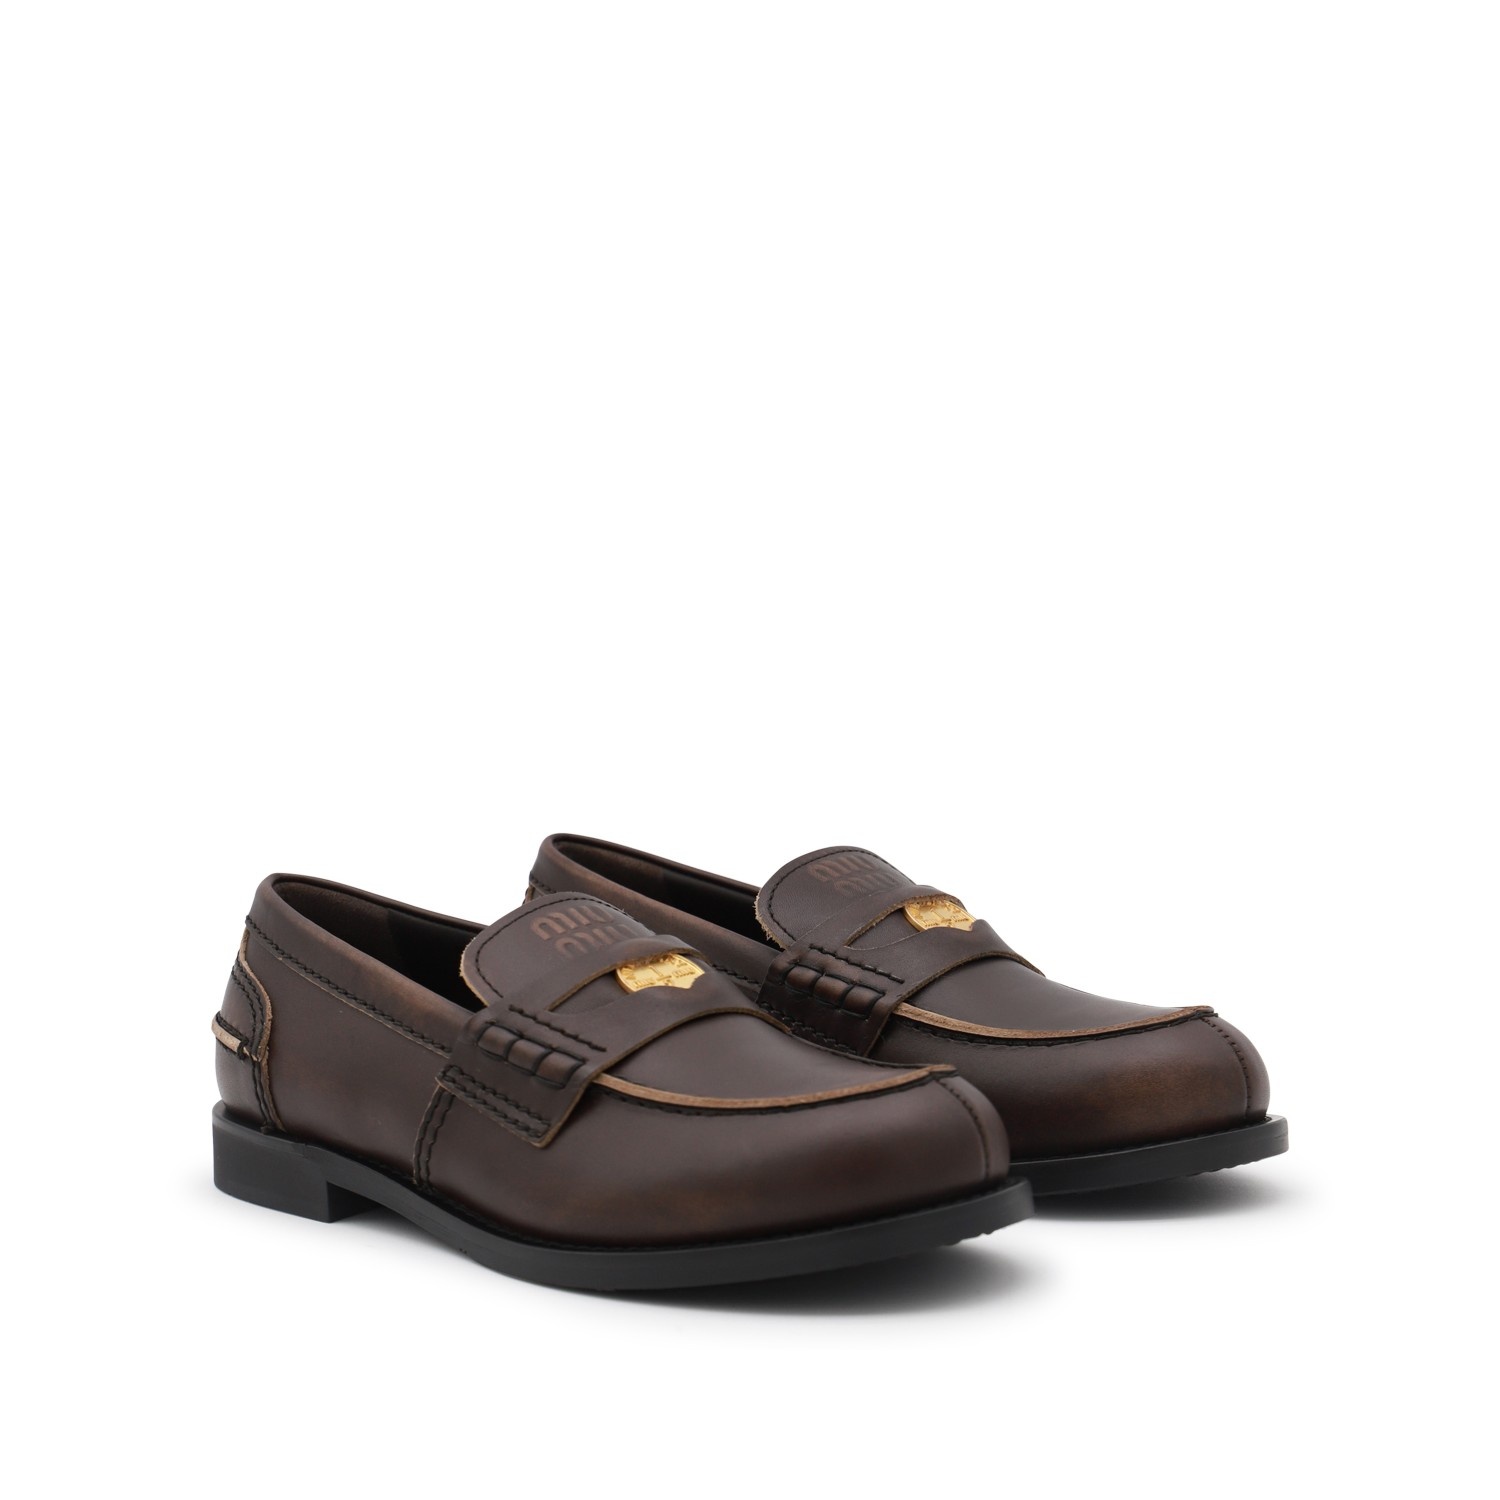 BROWN LEATHER LOAFERS - 3